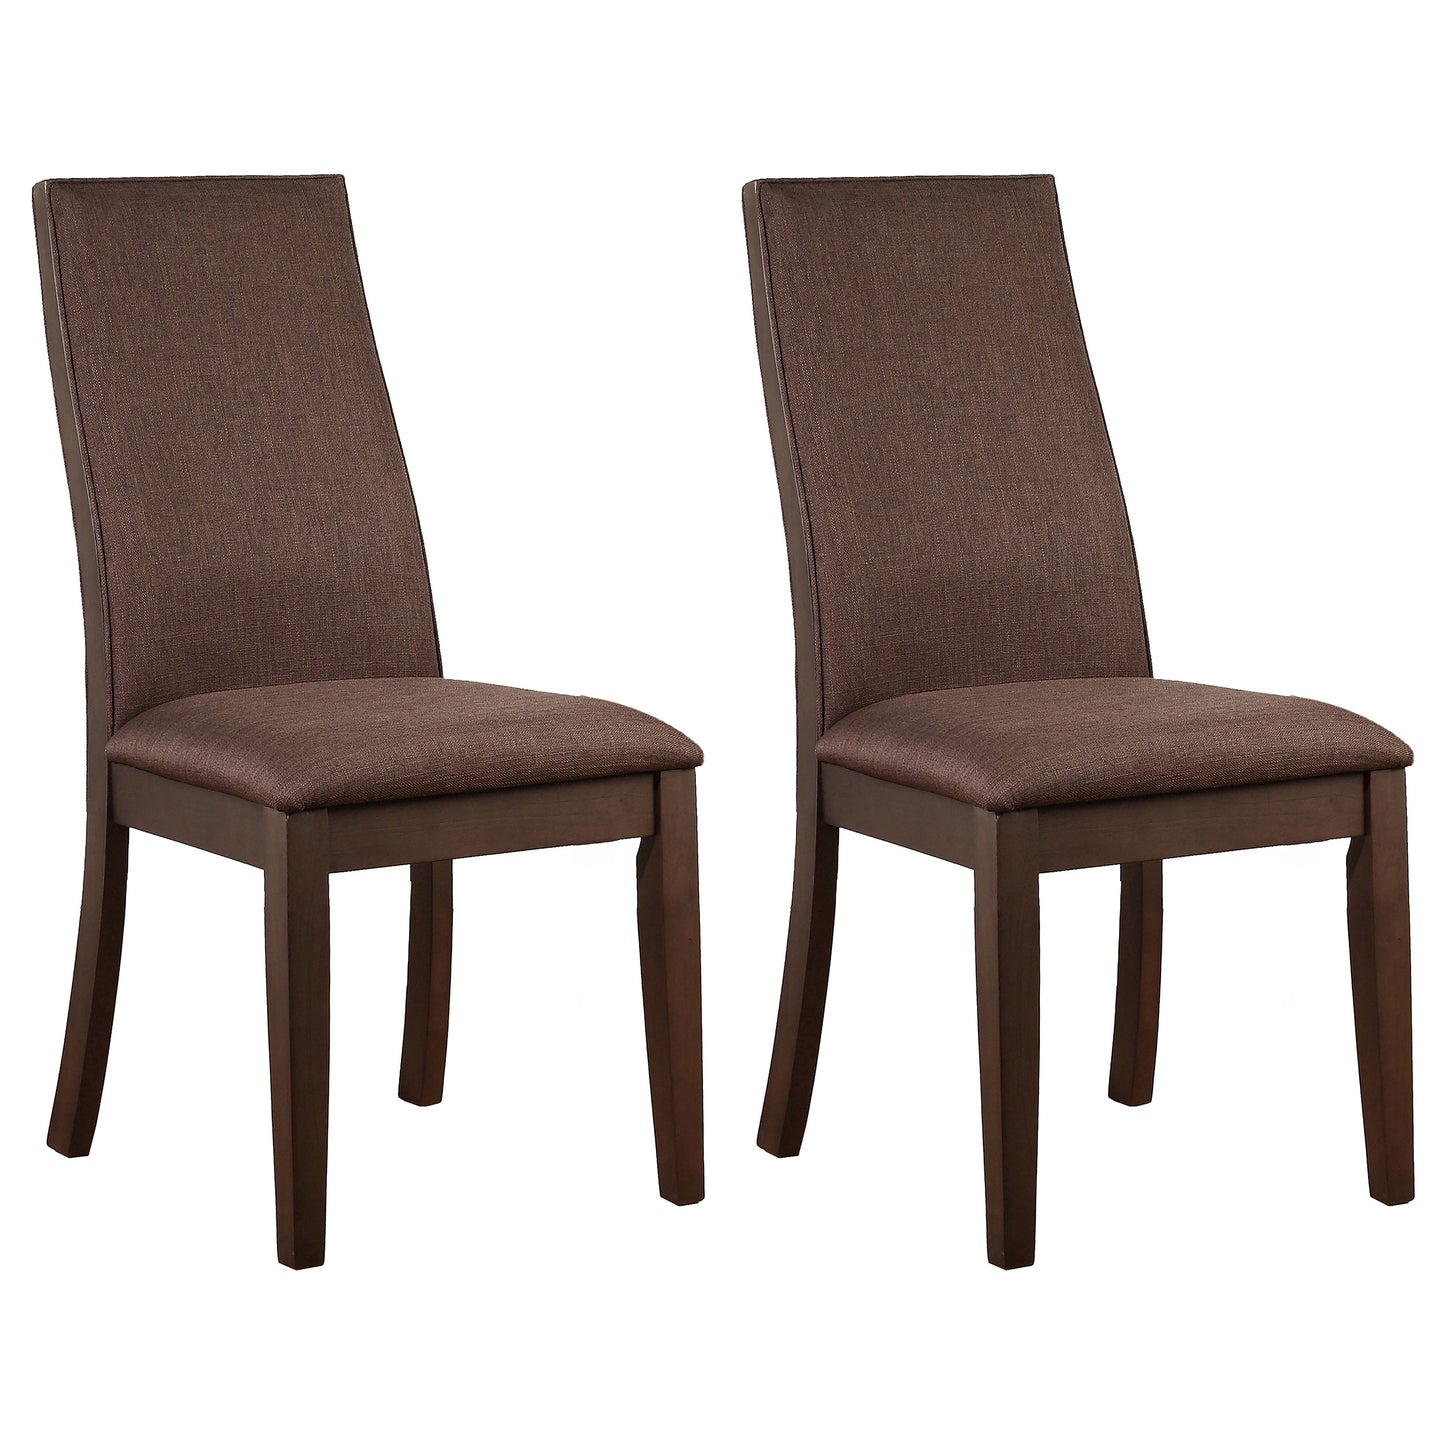 Spring Creek Upholstered Side Chairs Rich Cocoa Brown (Set of 2)